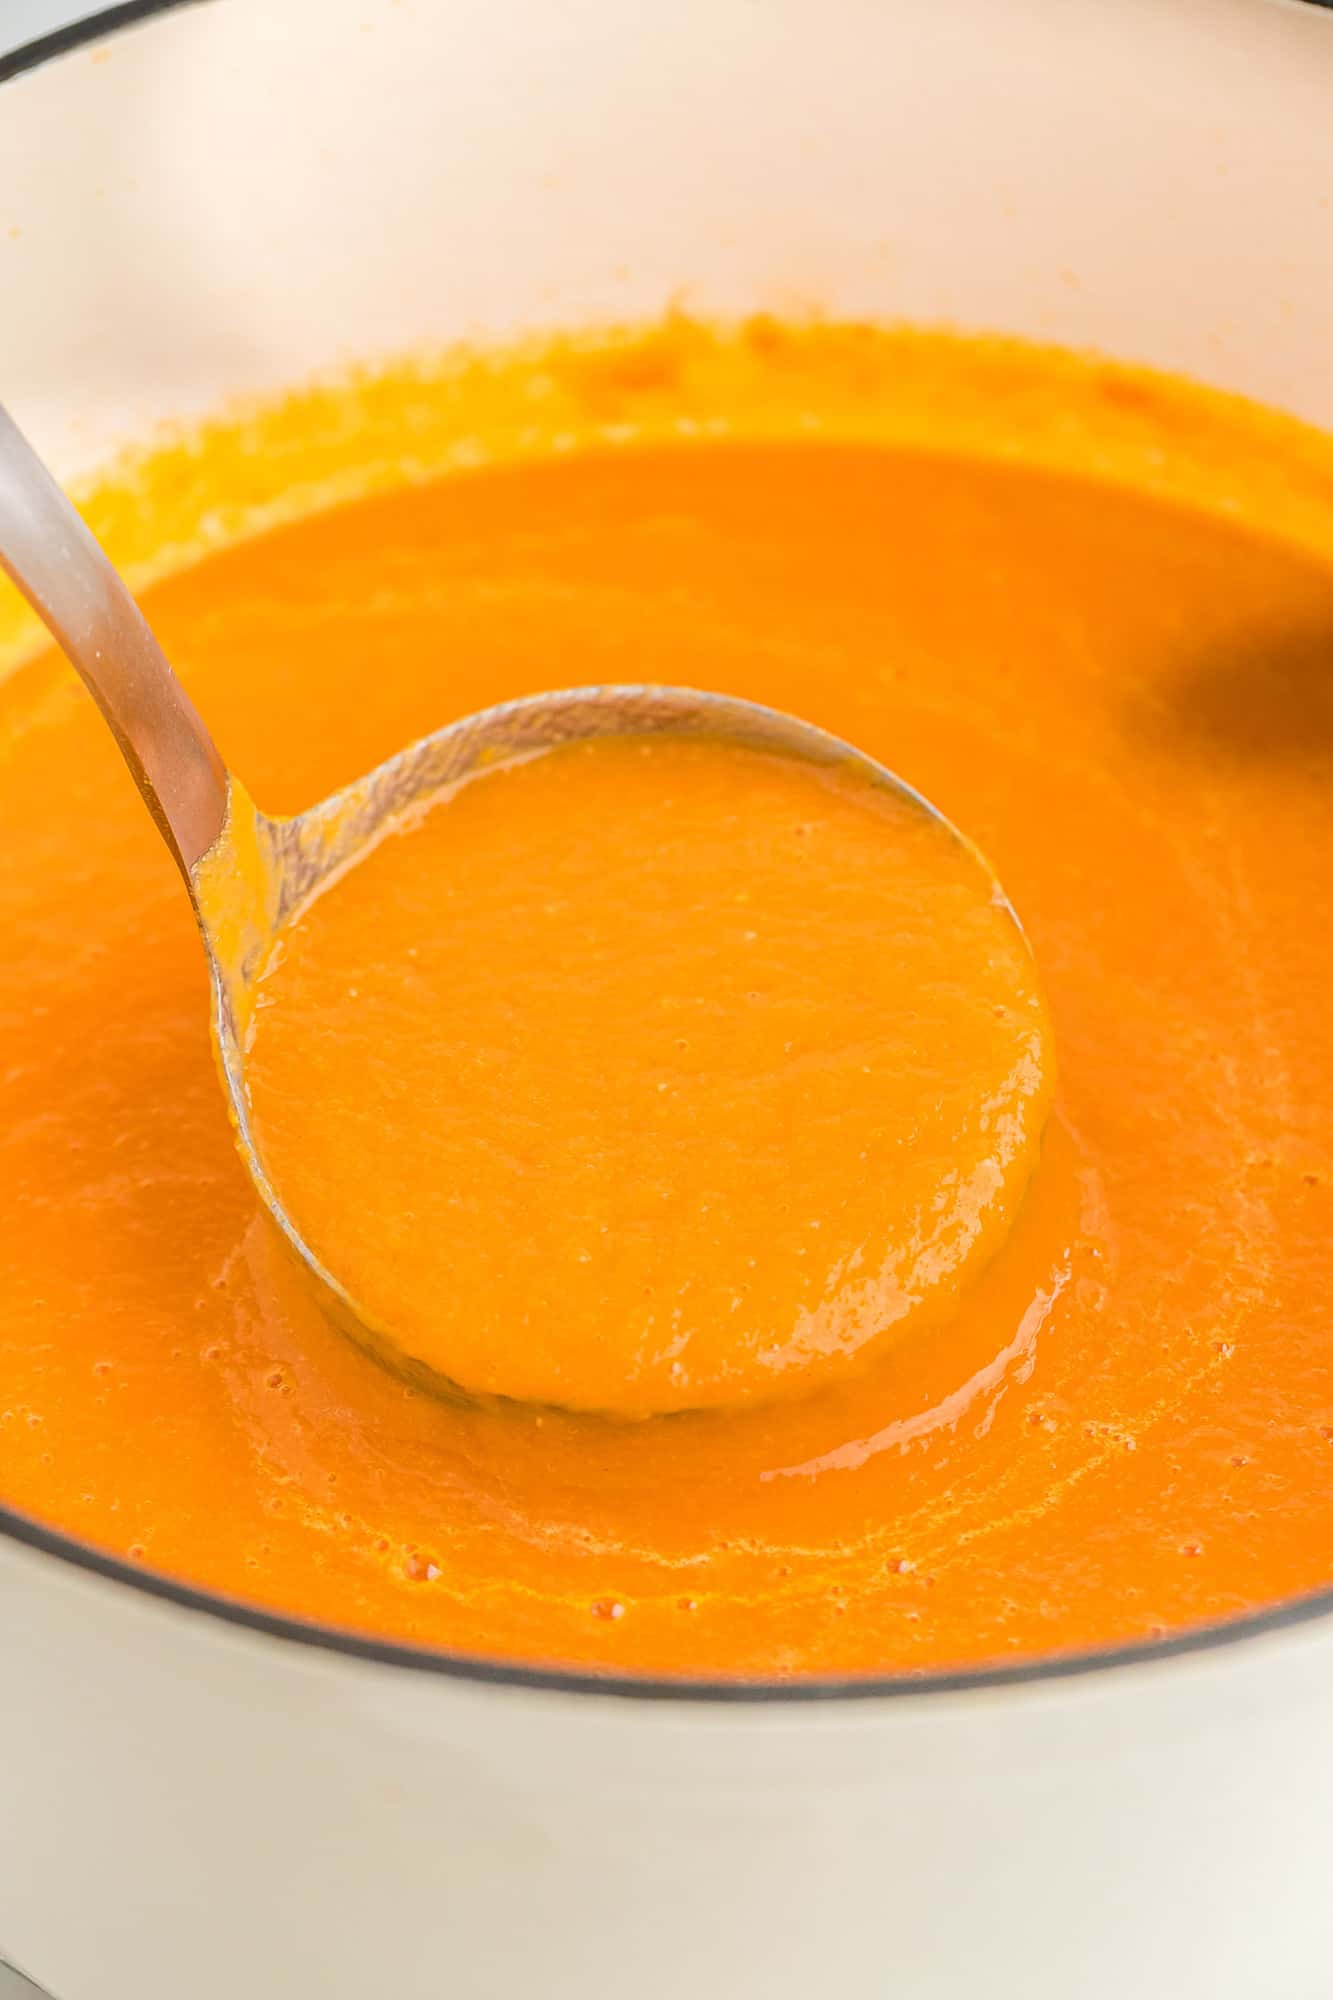 Smooth orange soup in a ladle.